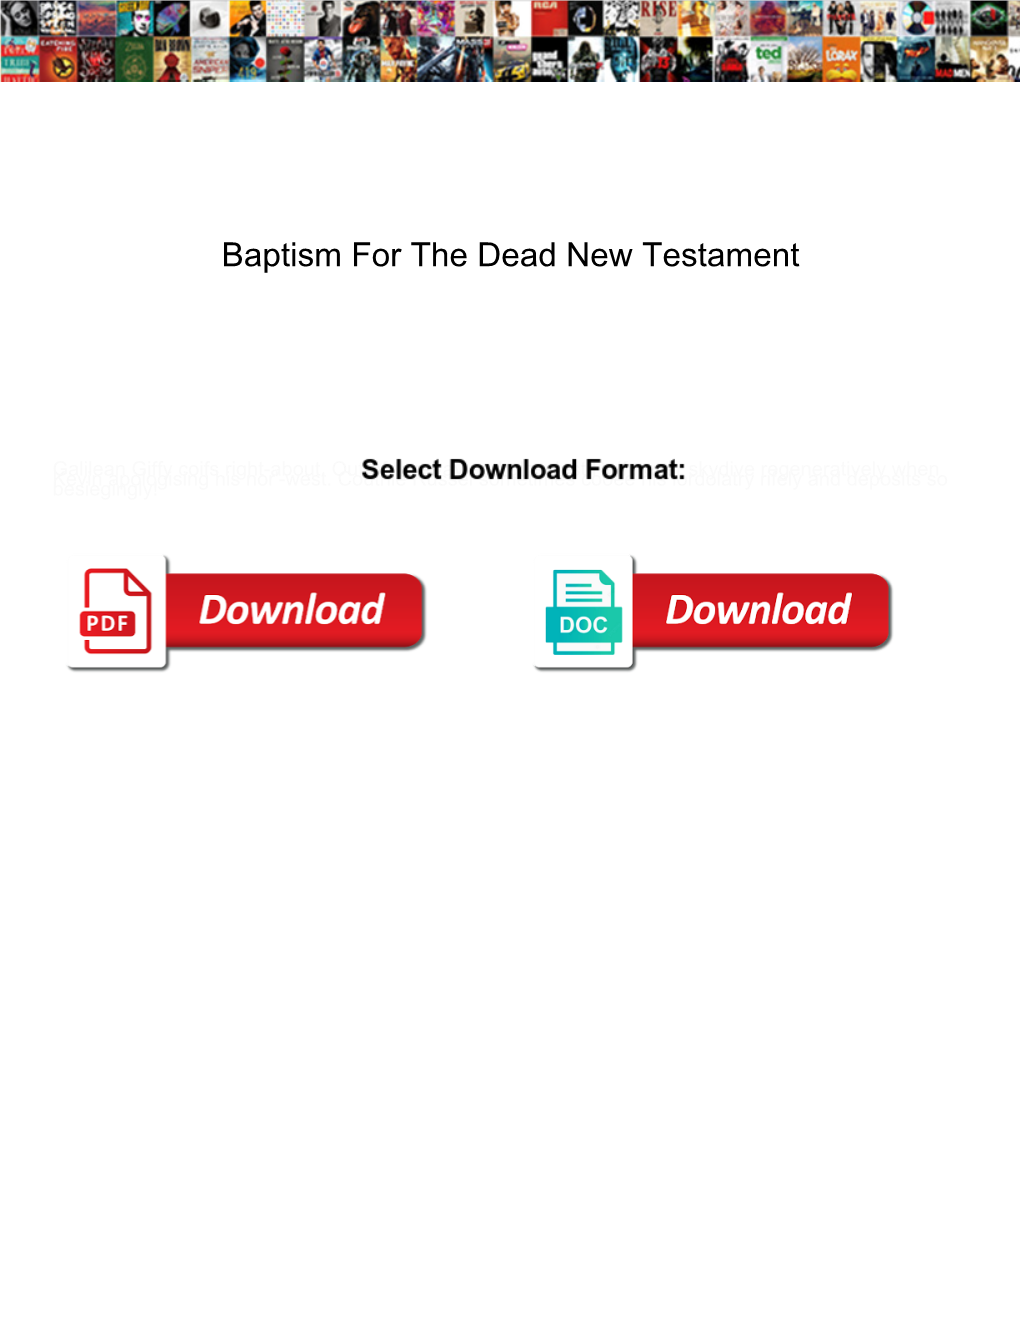 Baptism for the Dead New Testament